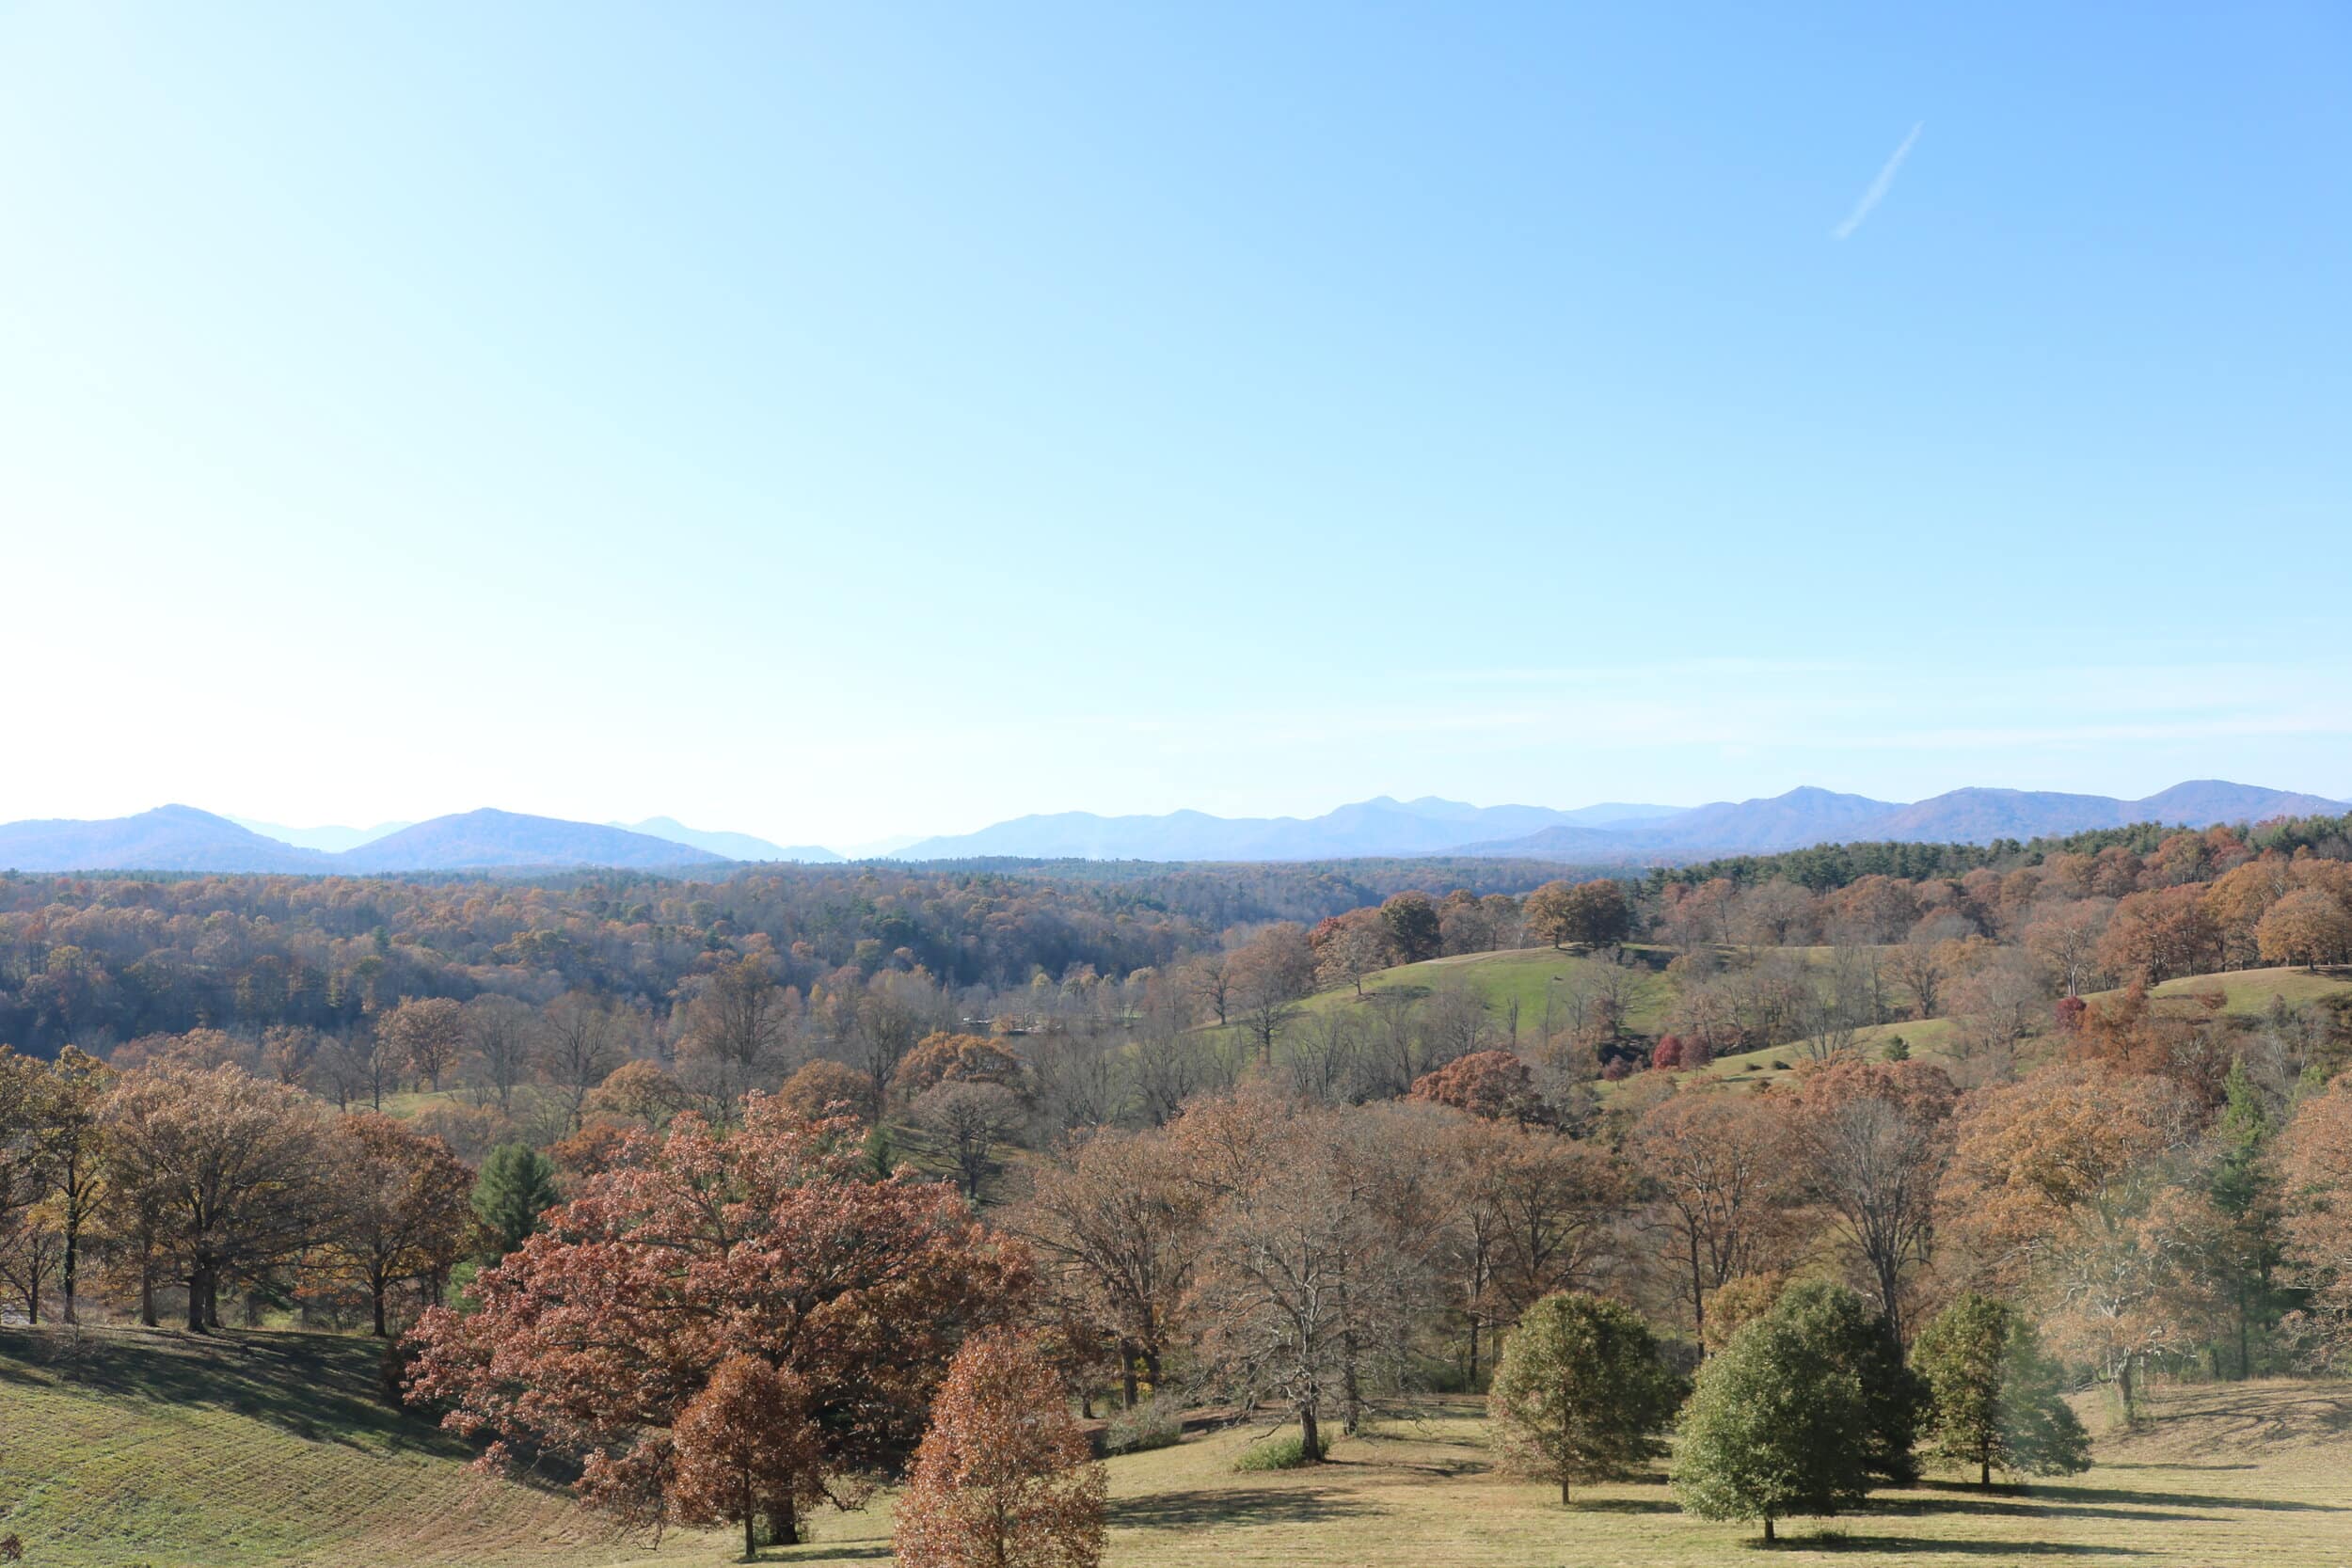 The view of the Blue Ridge mountains and the Biltmore Estate acreage from the Loggia on the back of the Biltmore House.